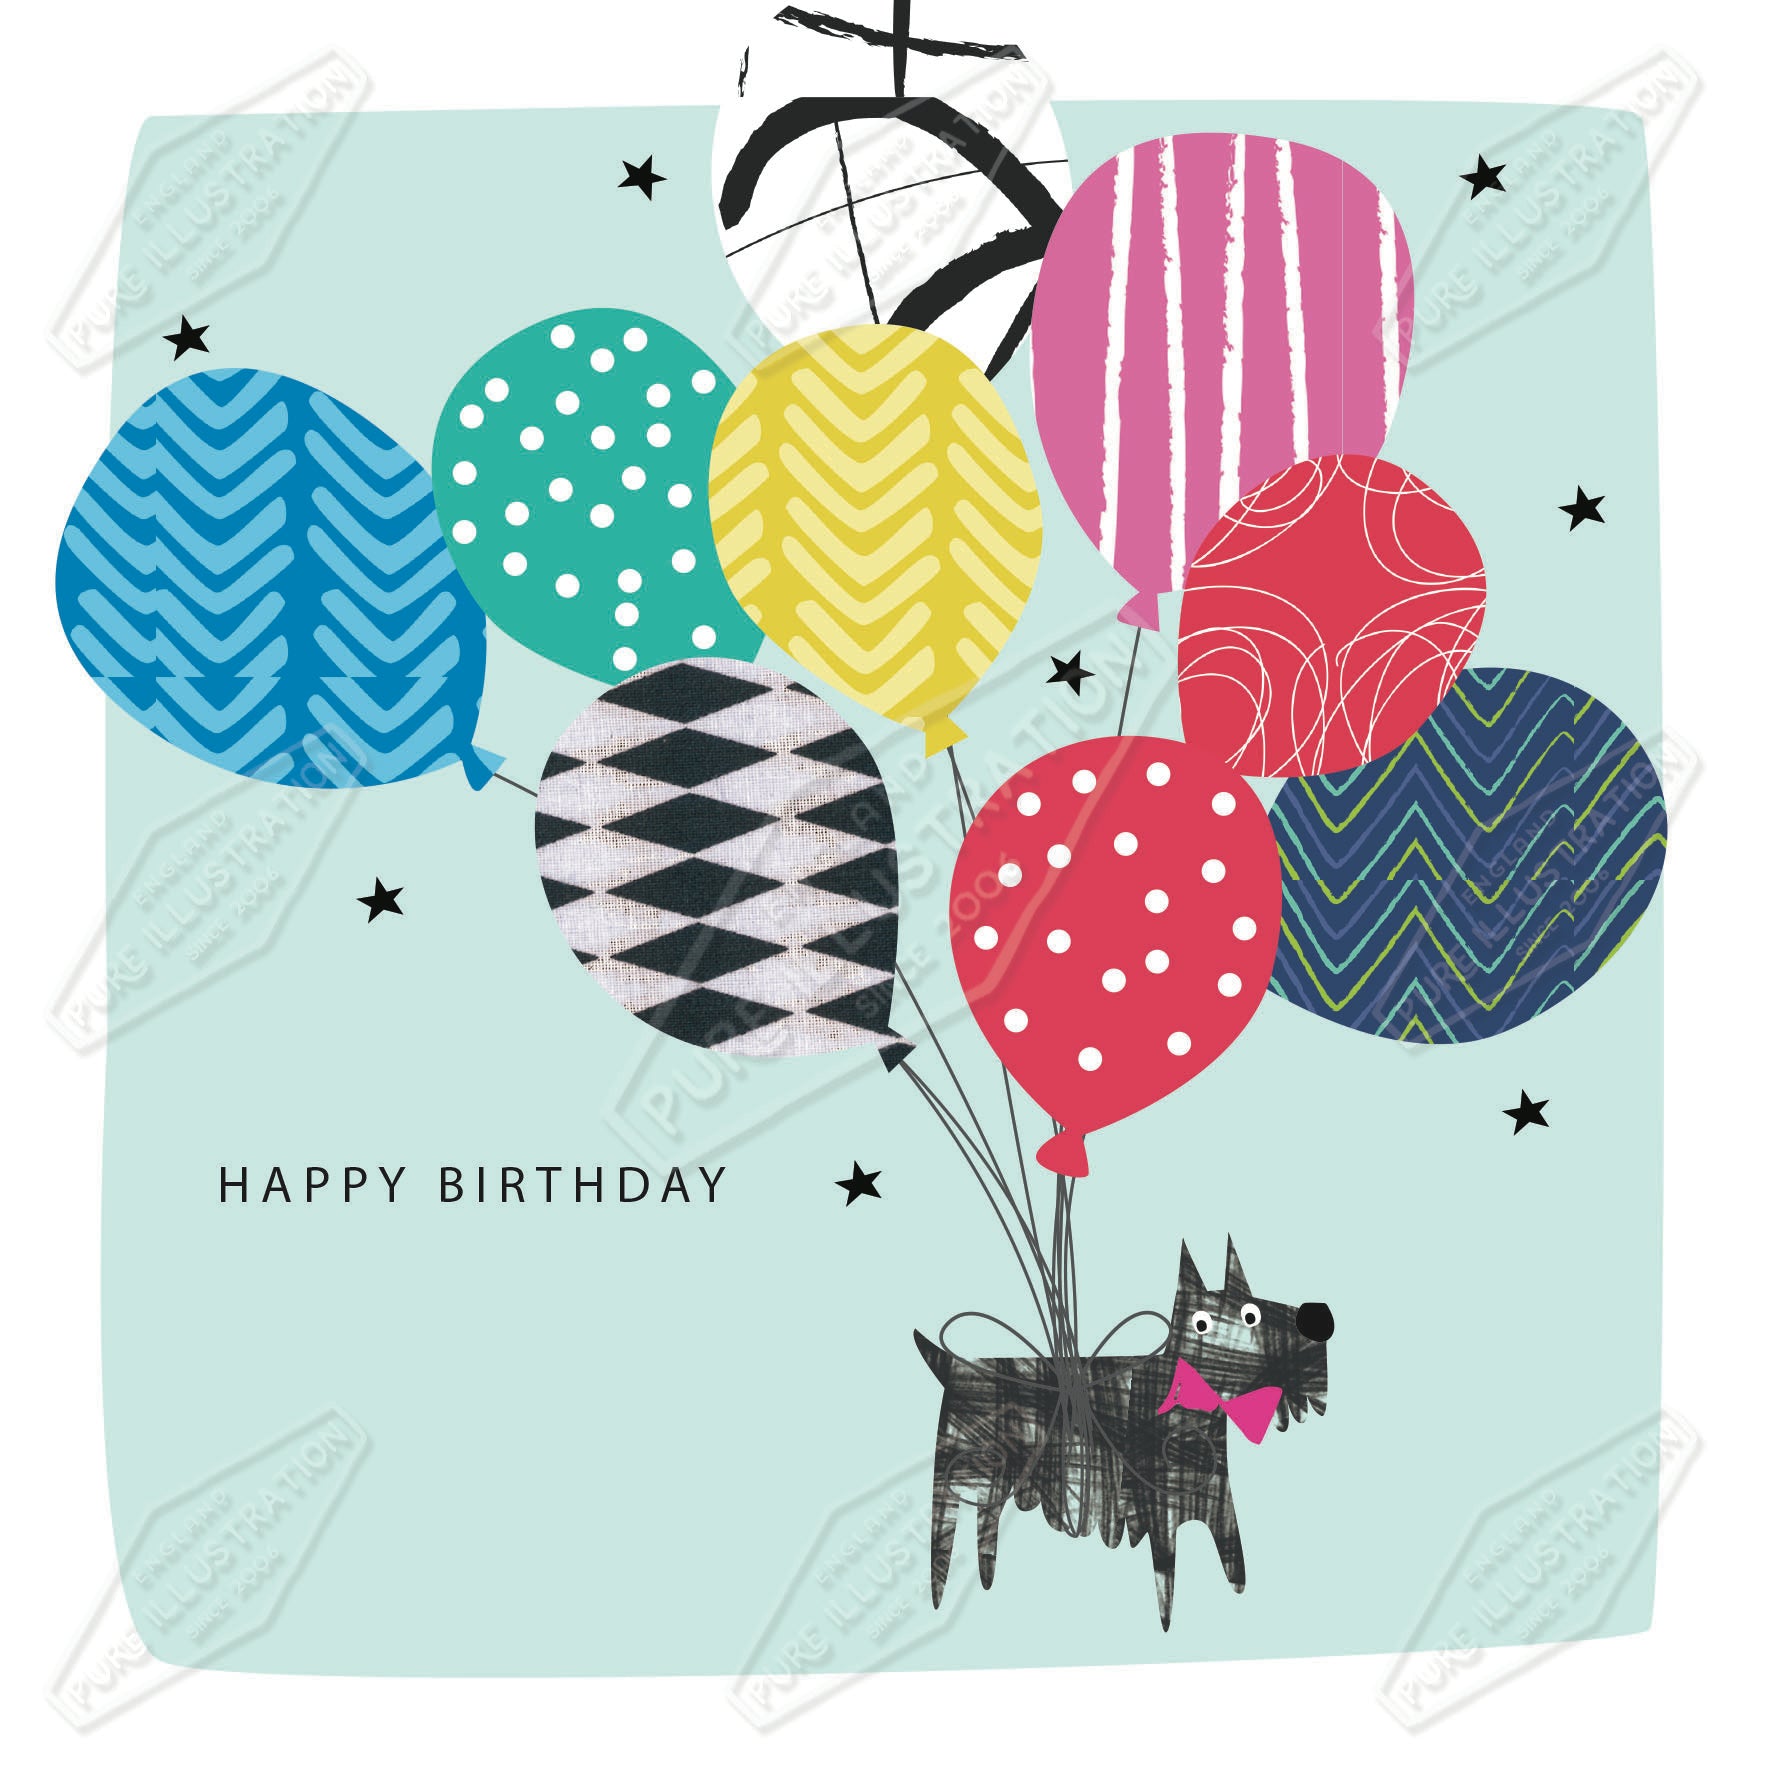 00035023IMC - Dog & Balloon Birthday by Isla McDonald for Pure Art Licensing Agency International Product & Packaging Surface Design 